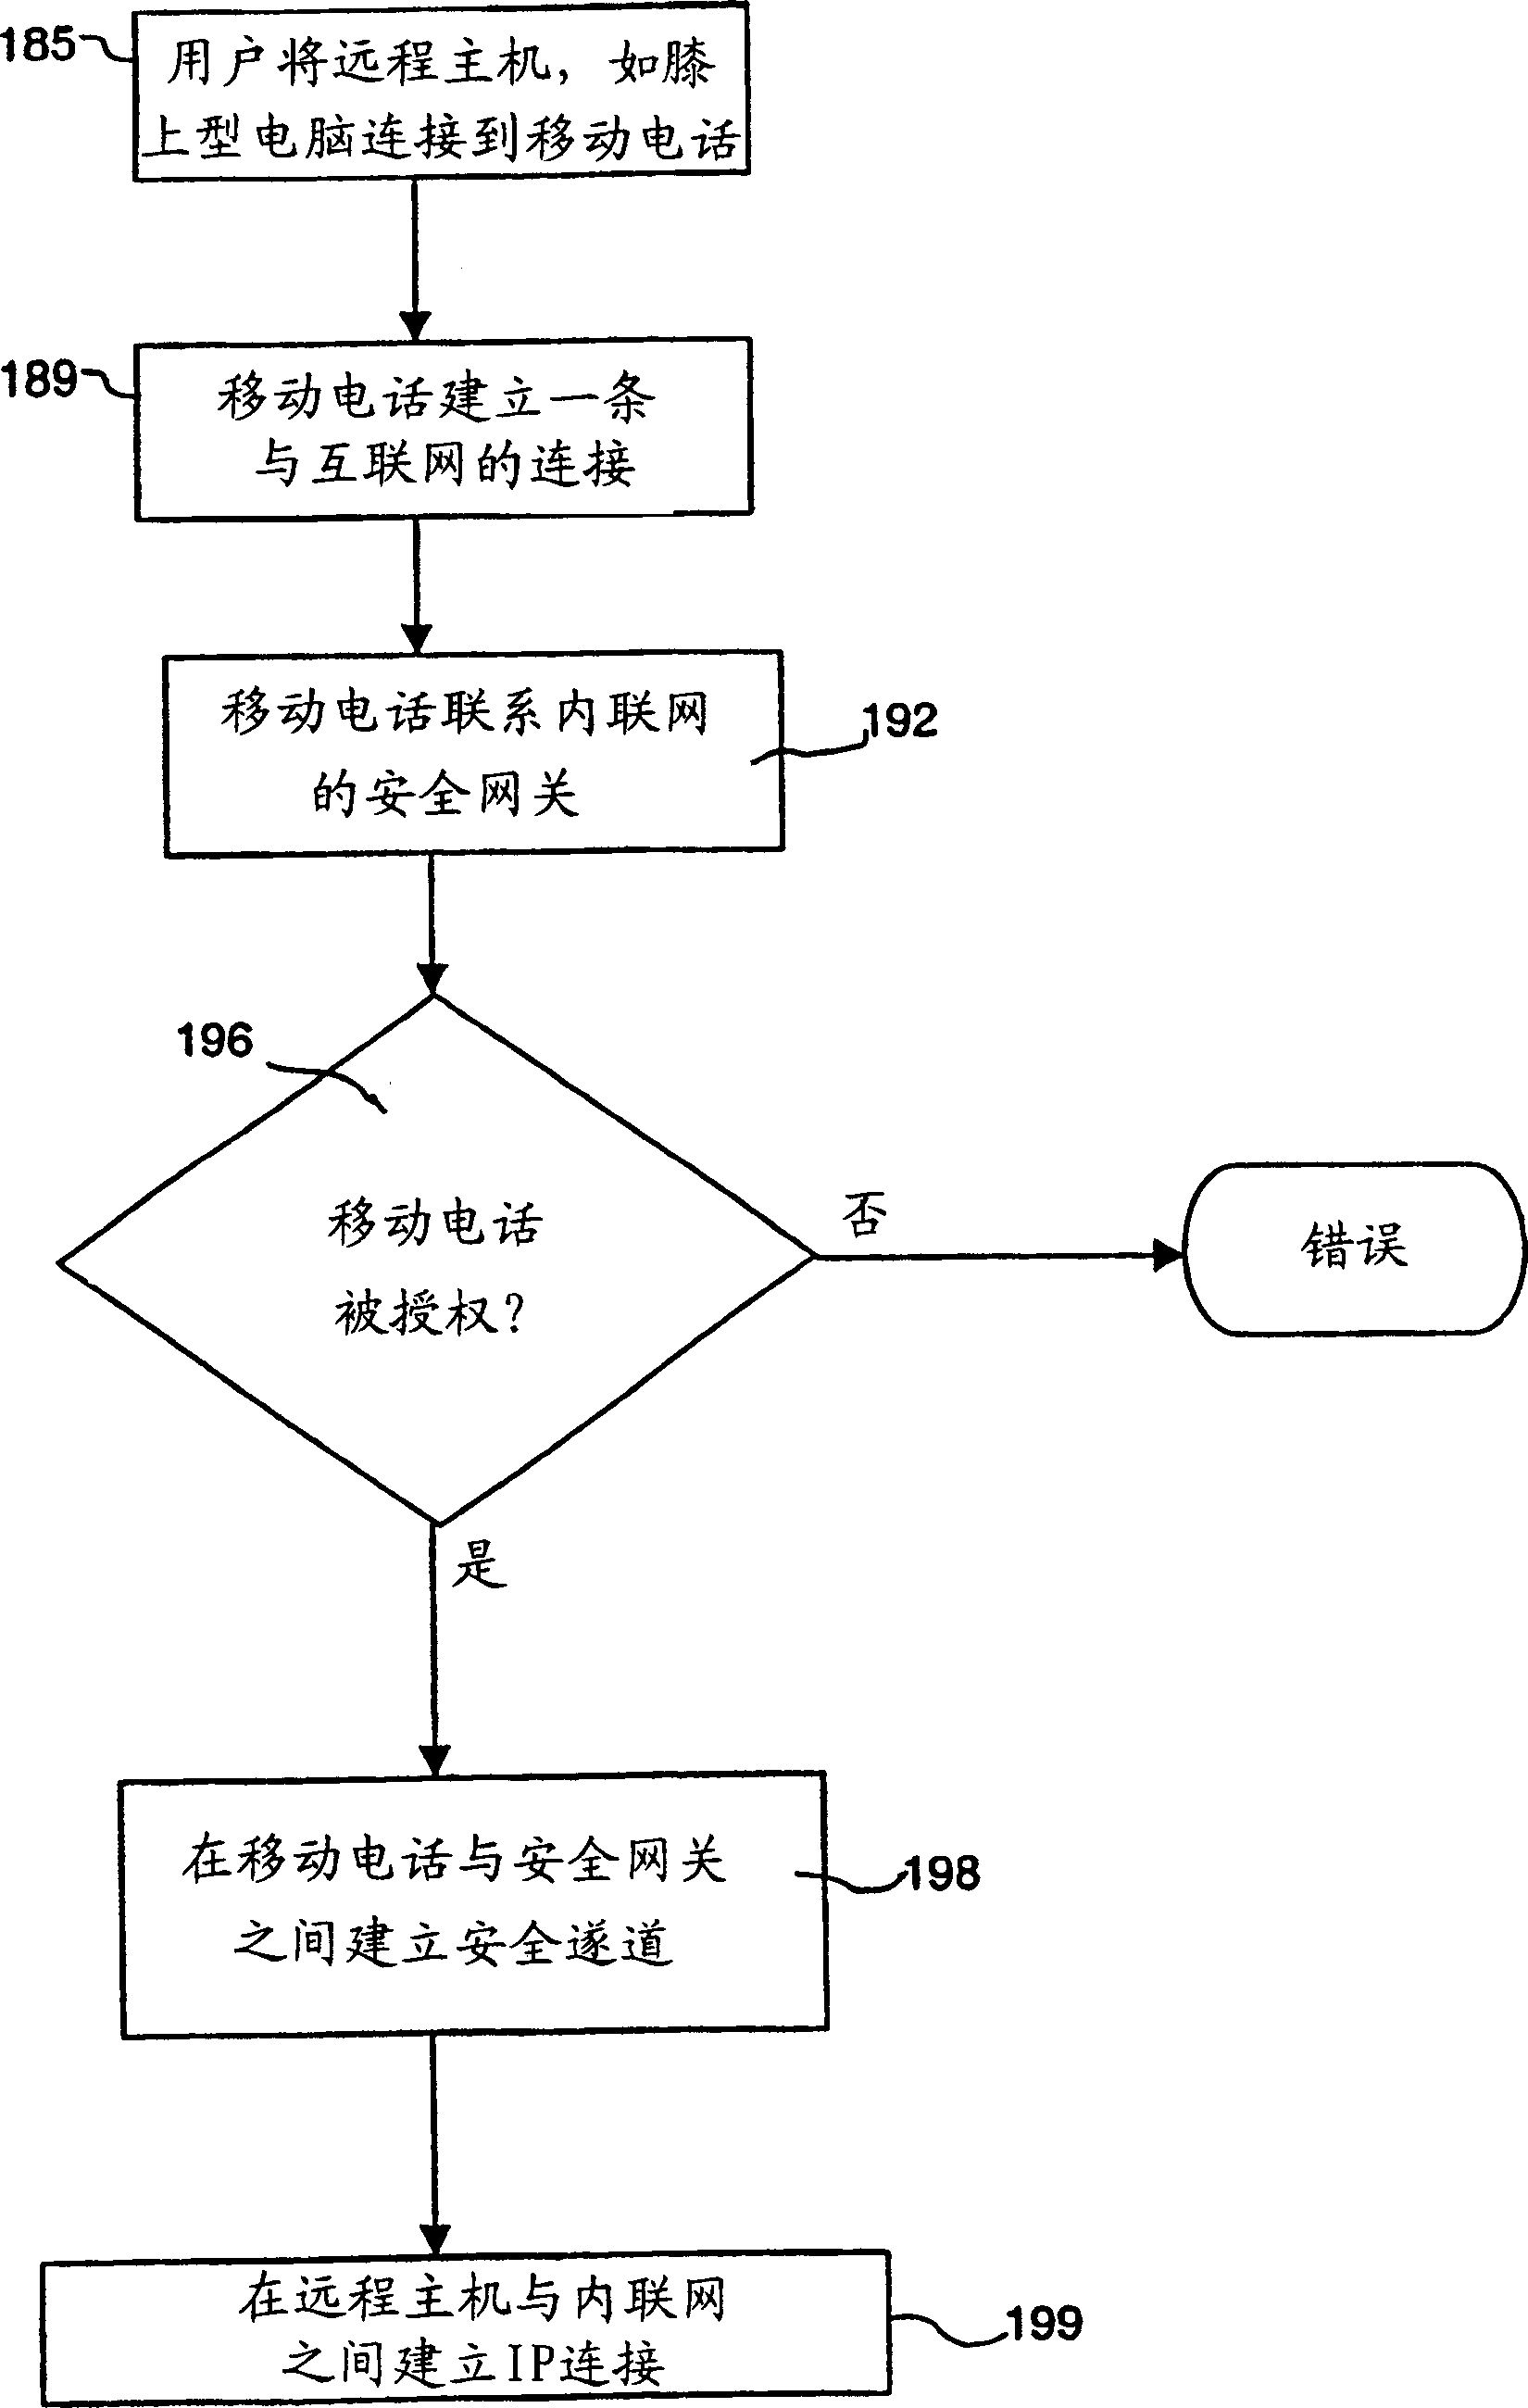 Methods and arrangements in a telecommunications system